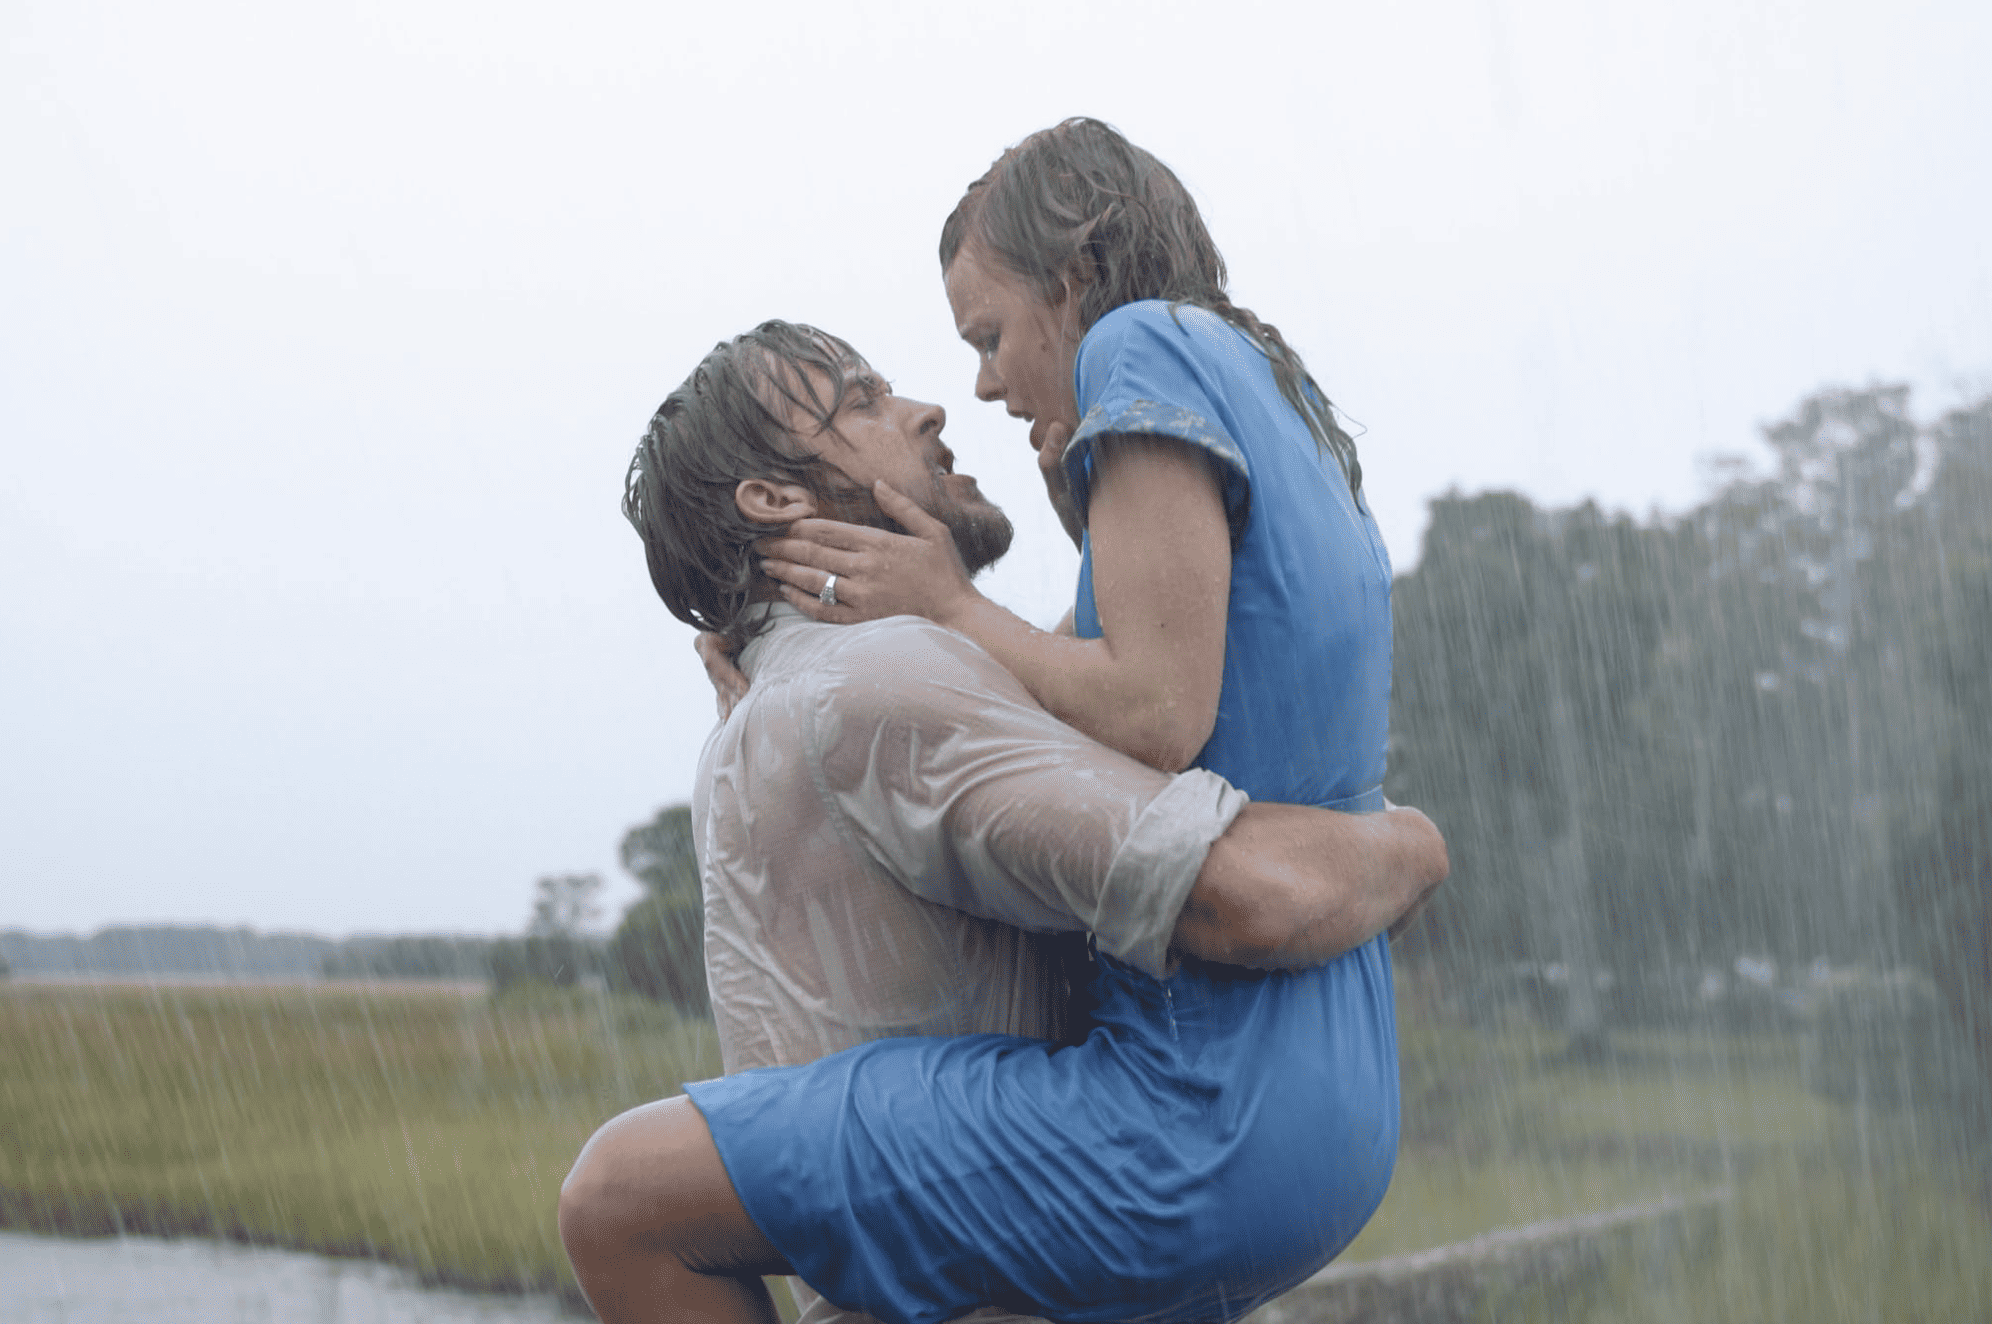 A man and woman embrace in the rain in this image from New Line Cinema